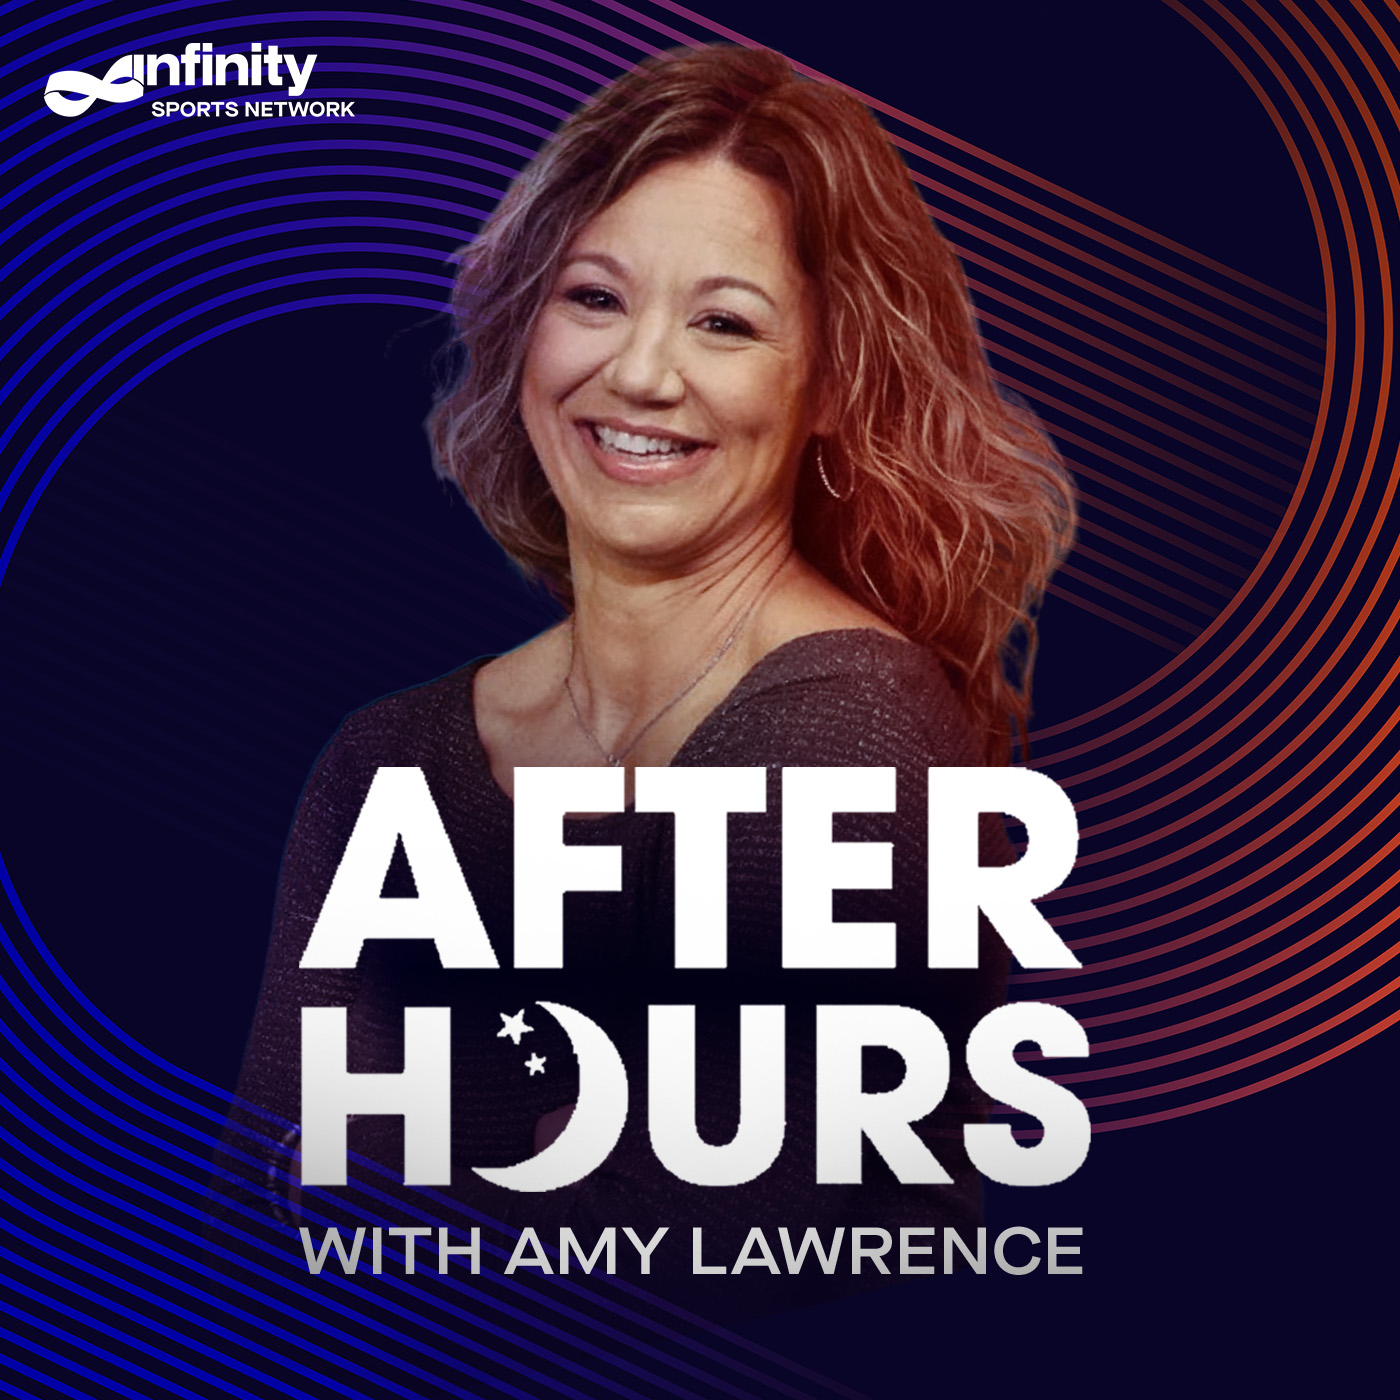 7/14/21 After Hours with Amy Lawrence PODCAST: Hour 3